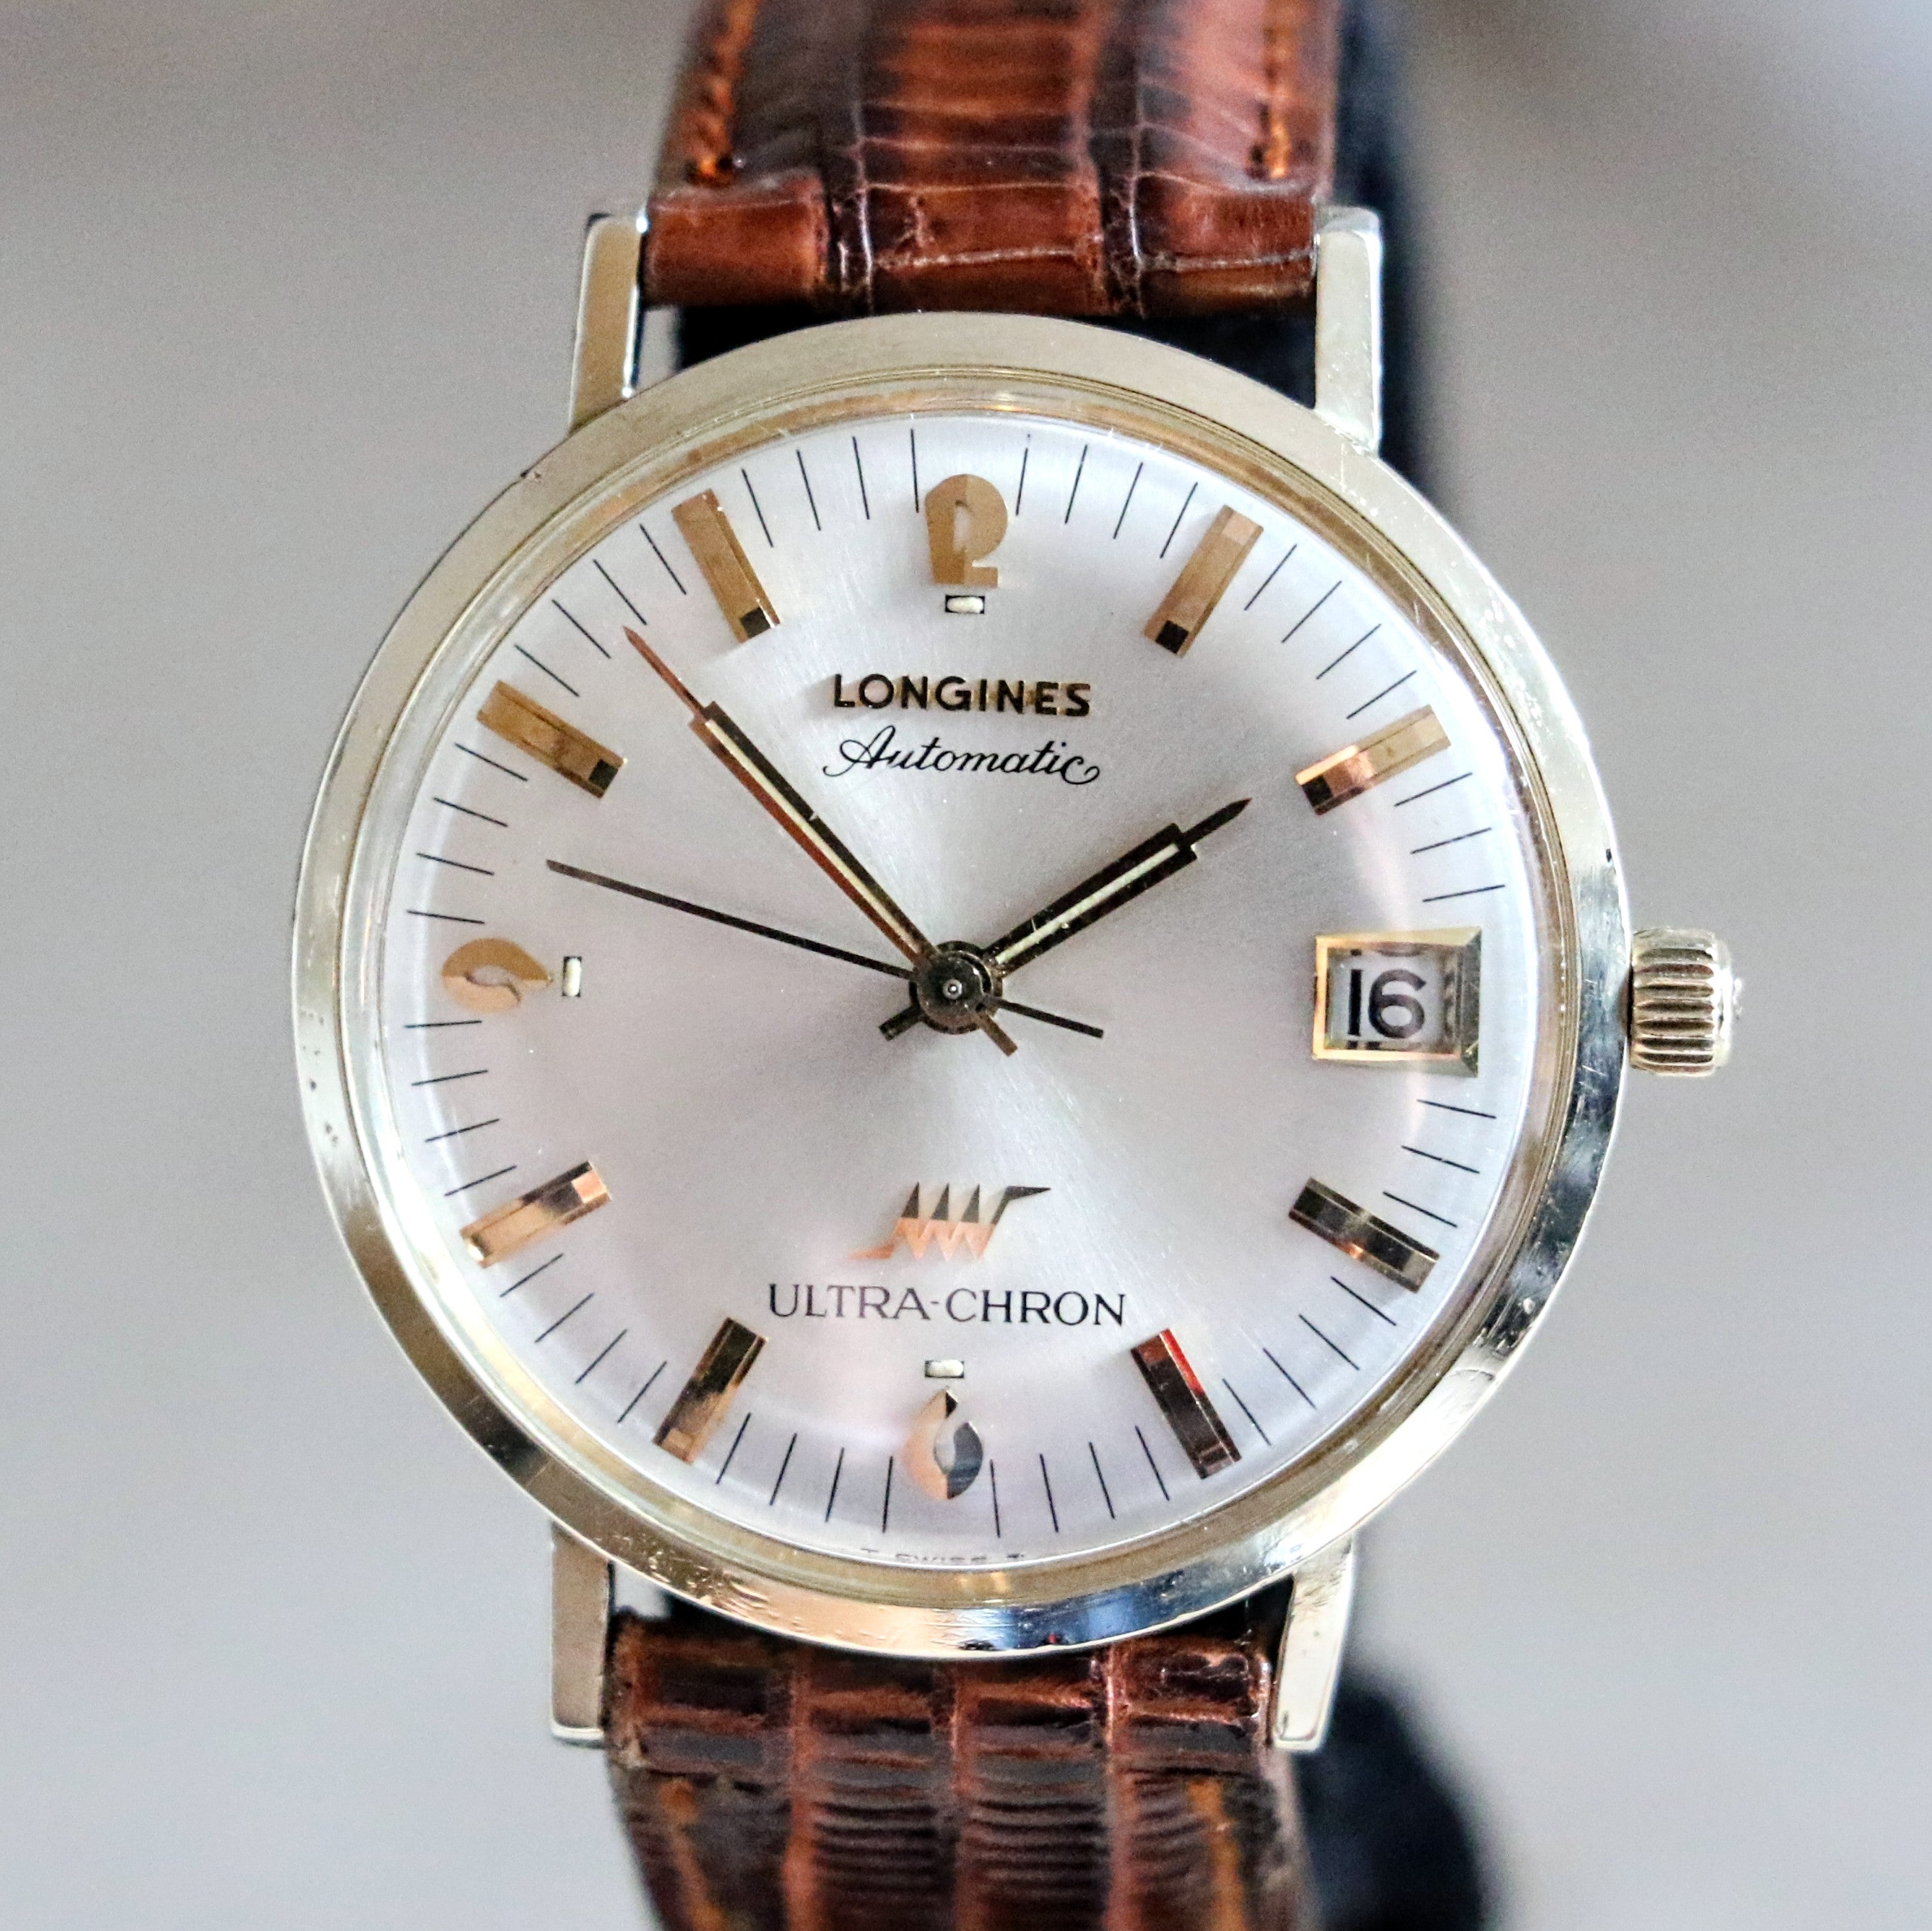 LONGINES Automatic Ultra-Chron High-Frequency Wristwatch Cal. 431 Vintage Watch